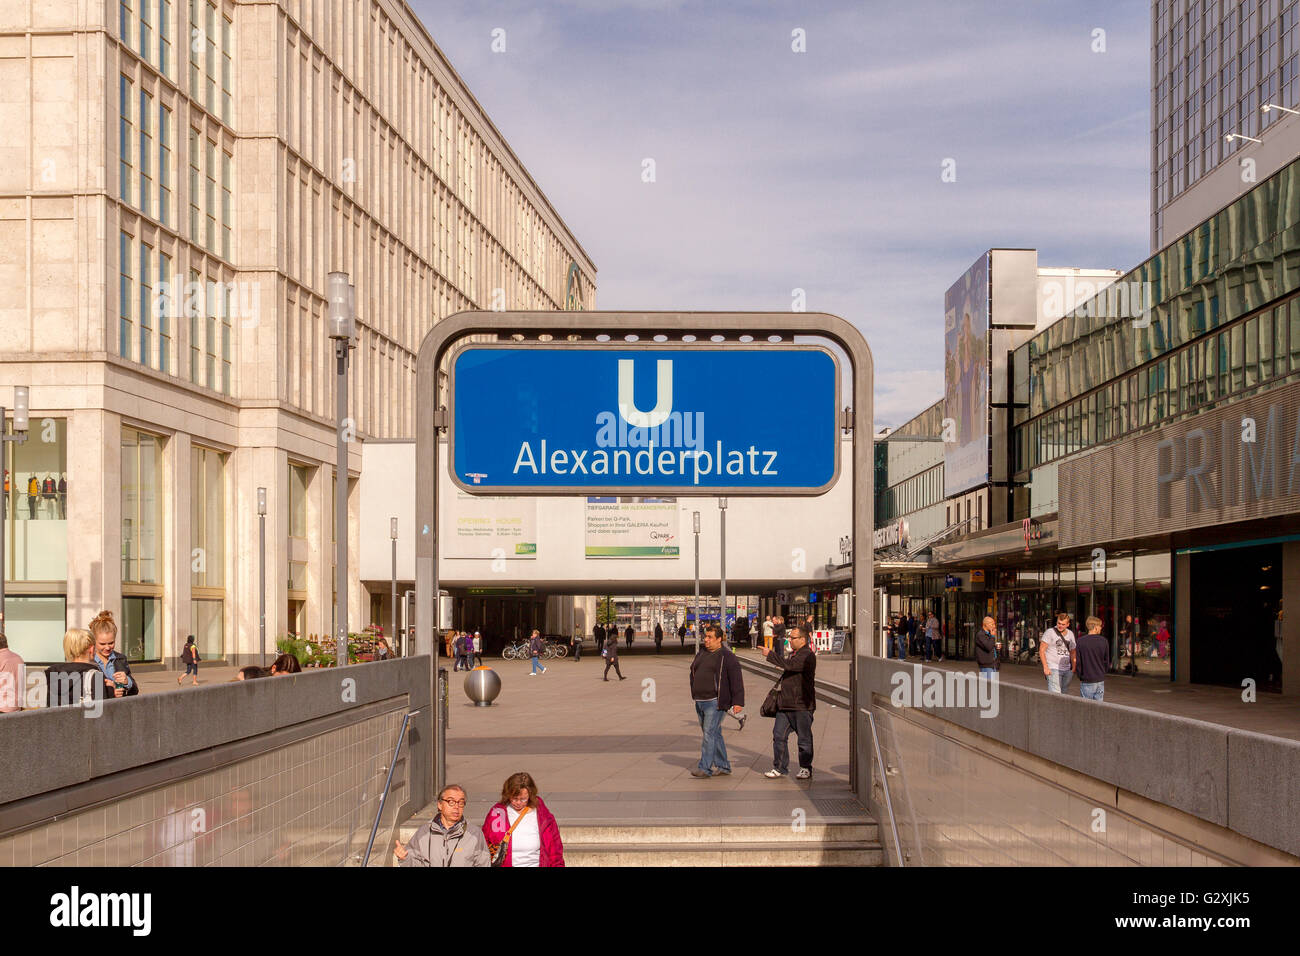 U Bahn Station entrance and sign at Alexanderplatz , a large public square in the Mitte district of Berlin, Germany Stock Photo